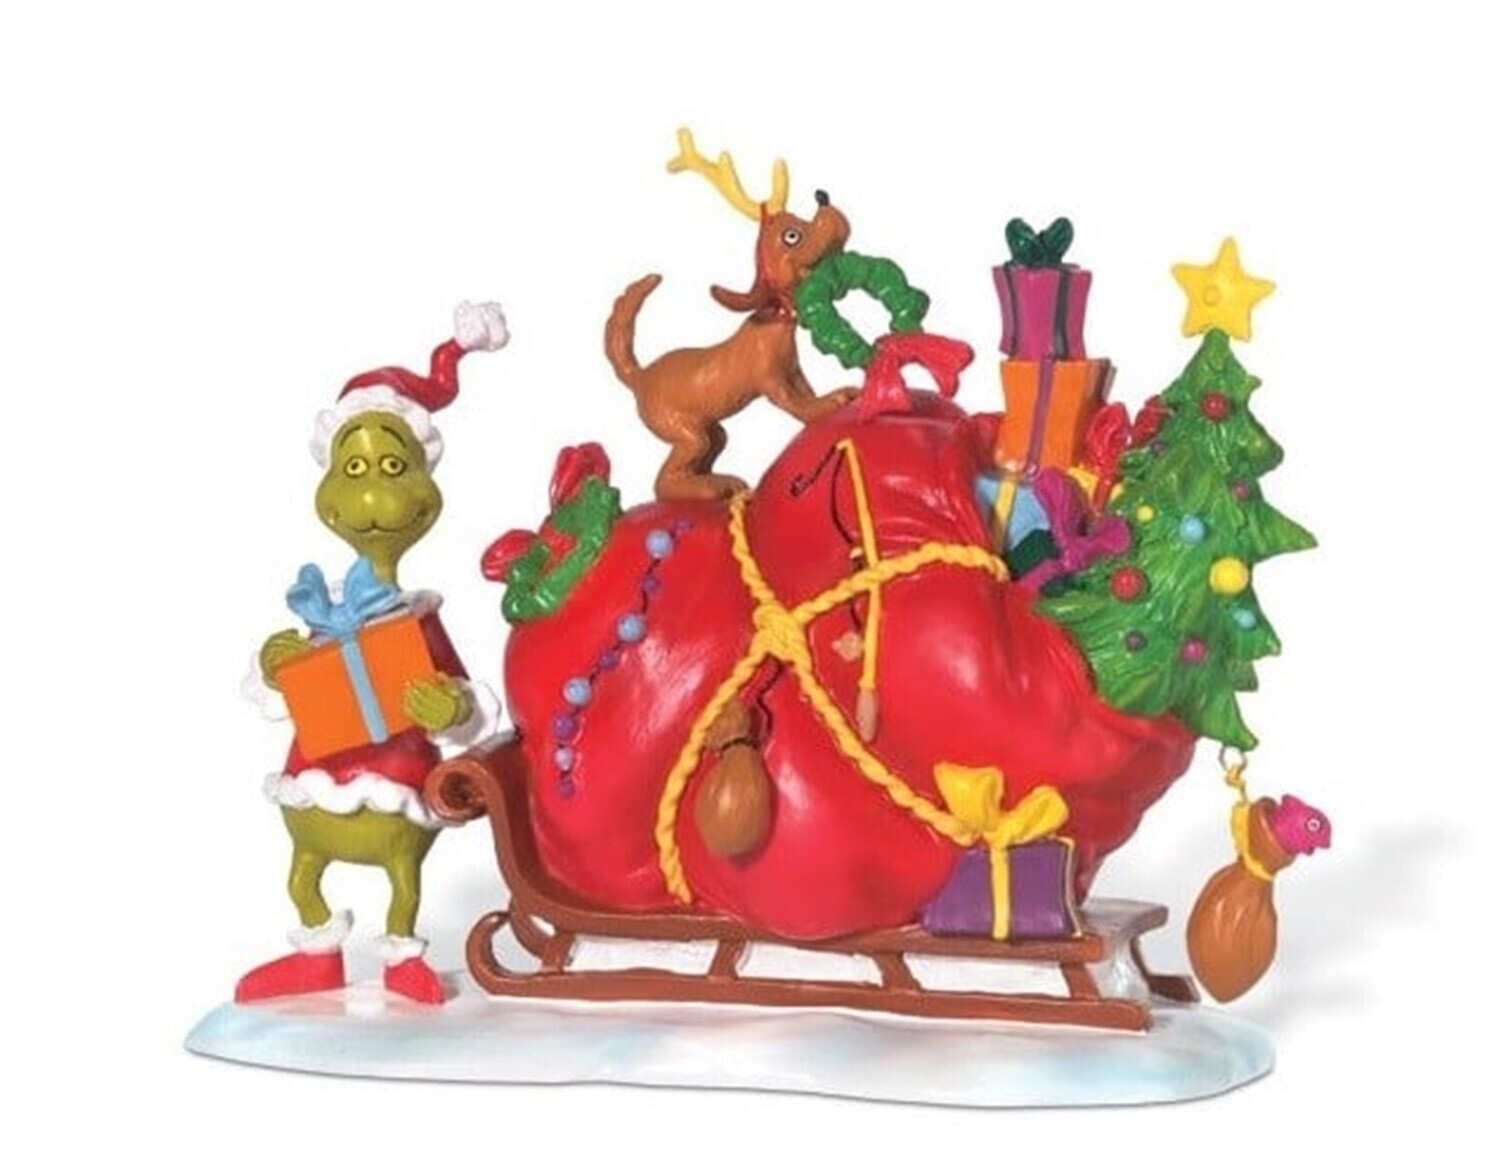 Department 56 Dr Seuss Grinch Village “Grinches Small Heart Grew Three Sizes that Day" Grinch & Max on the Sled (804158)